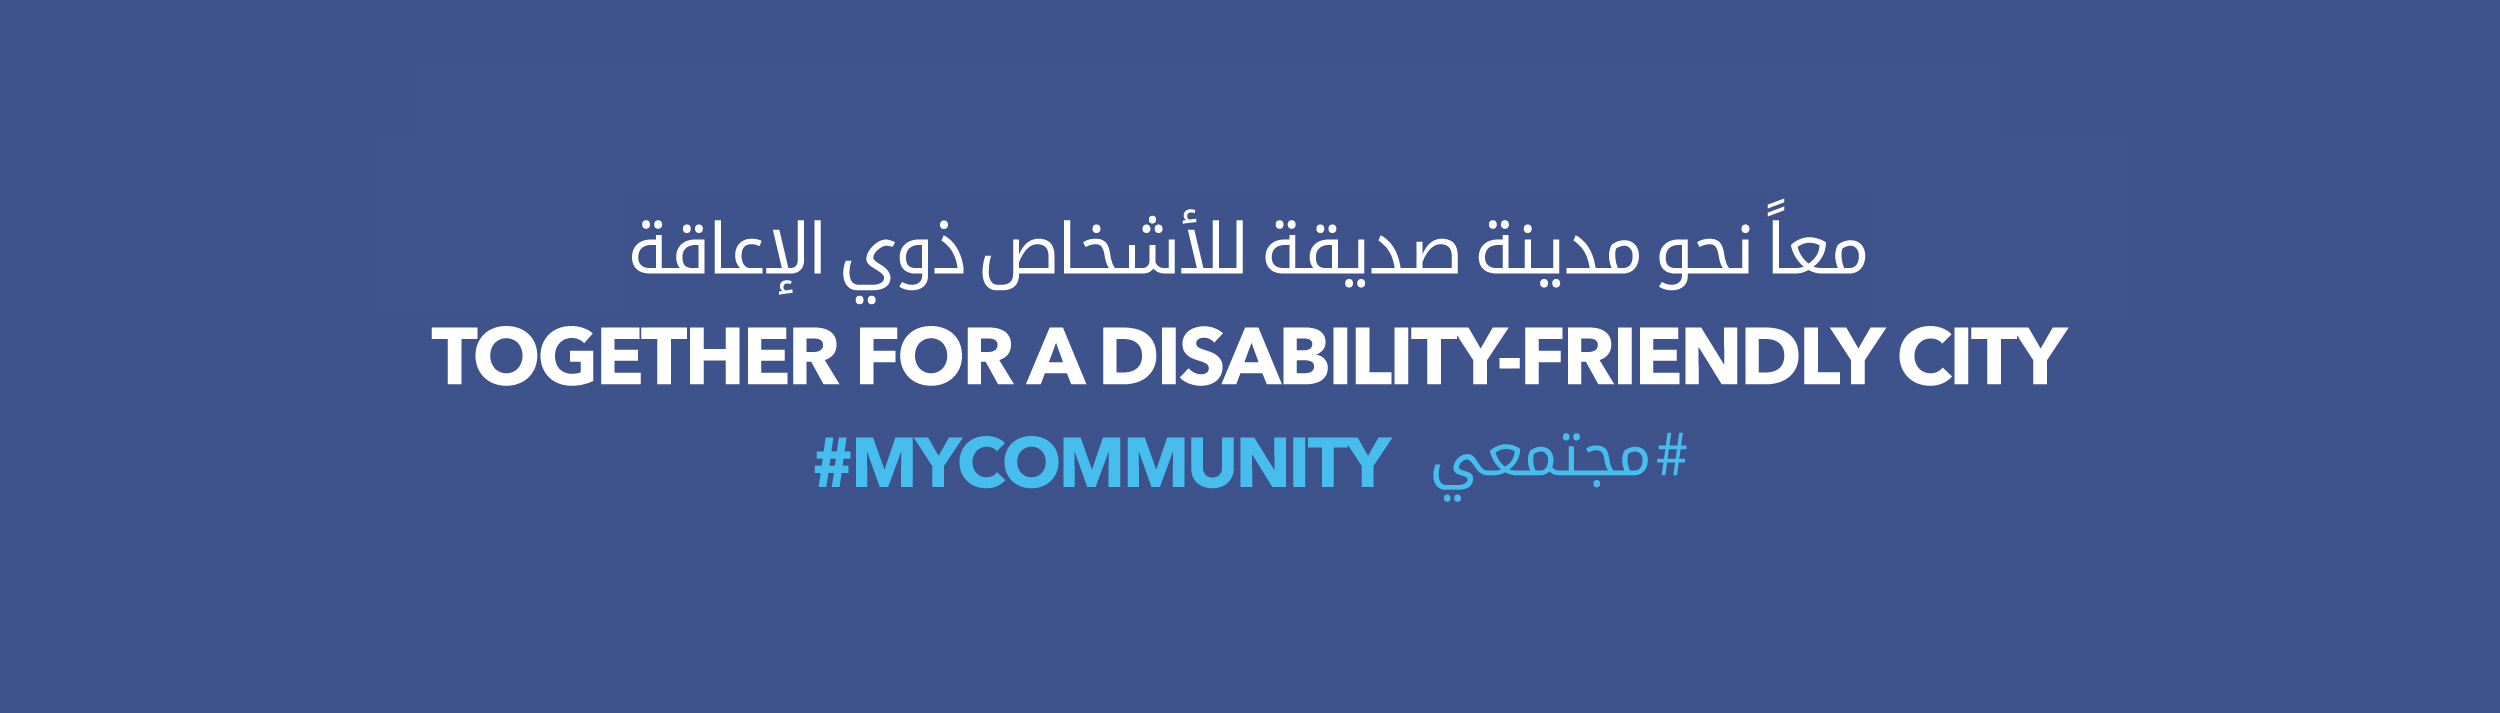 Together for a disability-friendly city